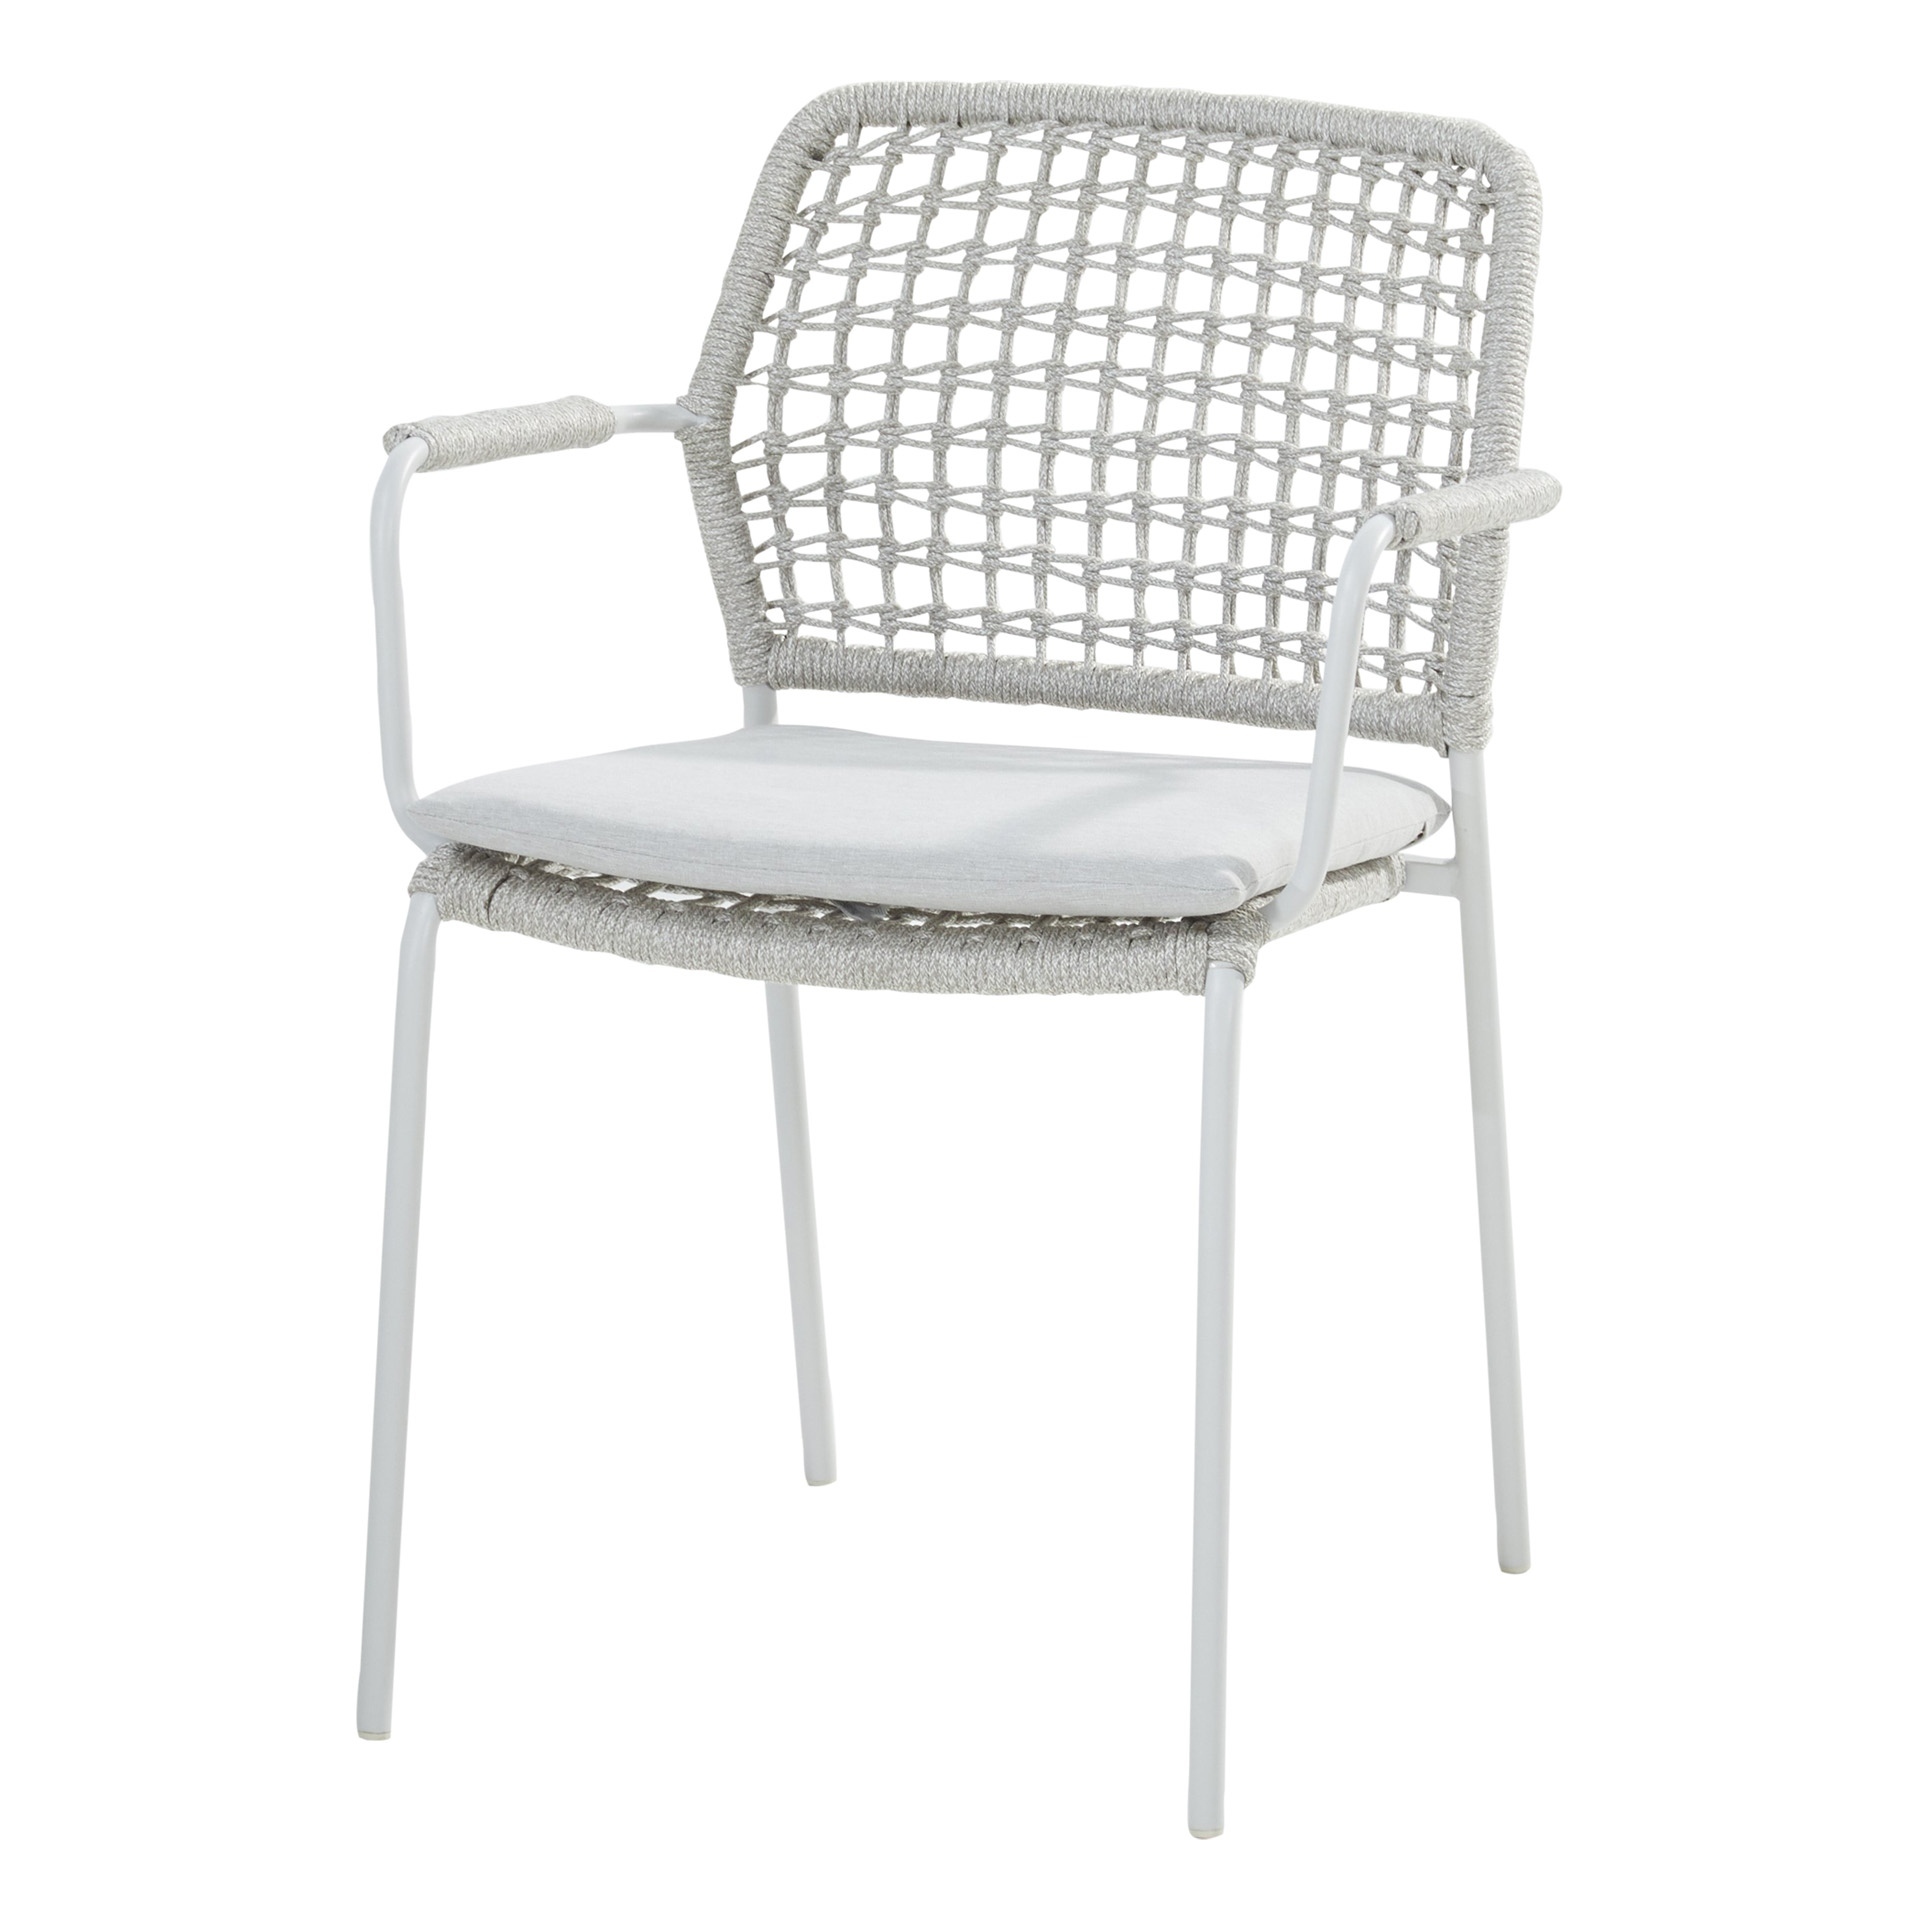 Barista stacking chair Forzen/frost grey with cushion